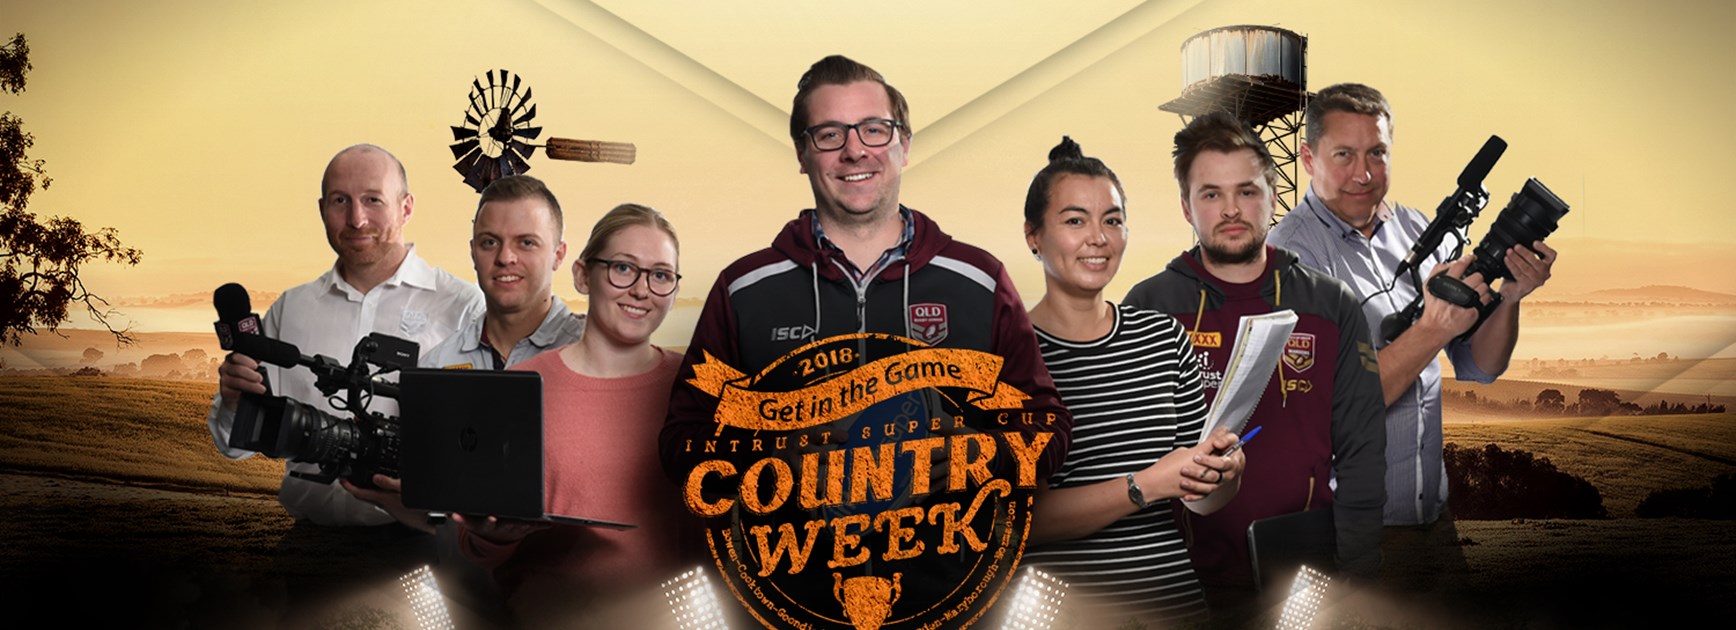 QRL Media takes you to #CountryWeek